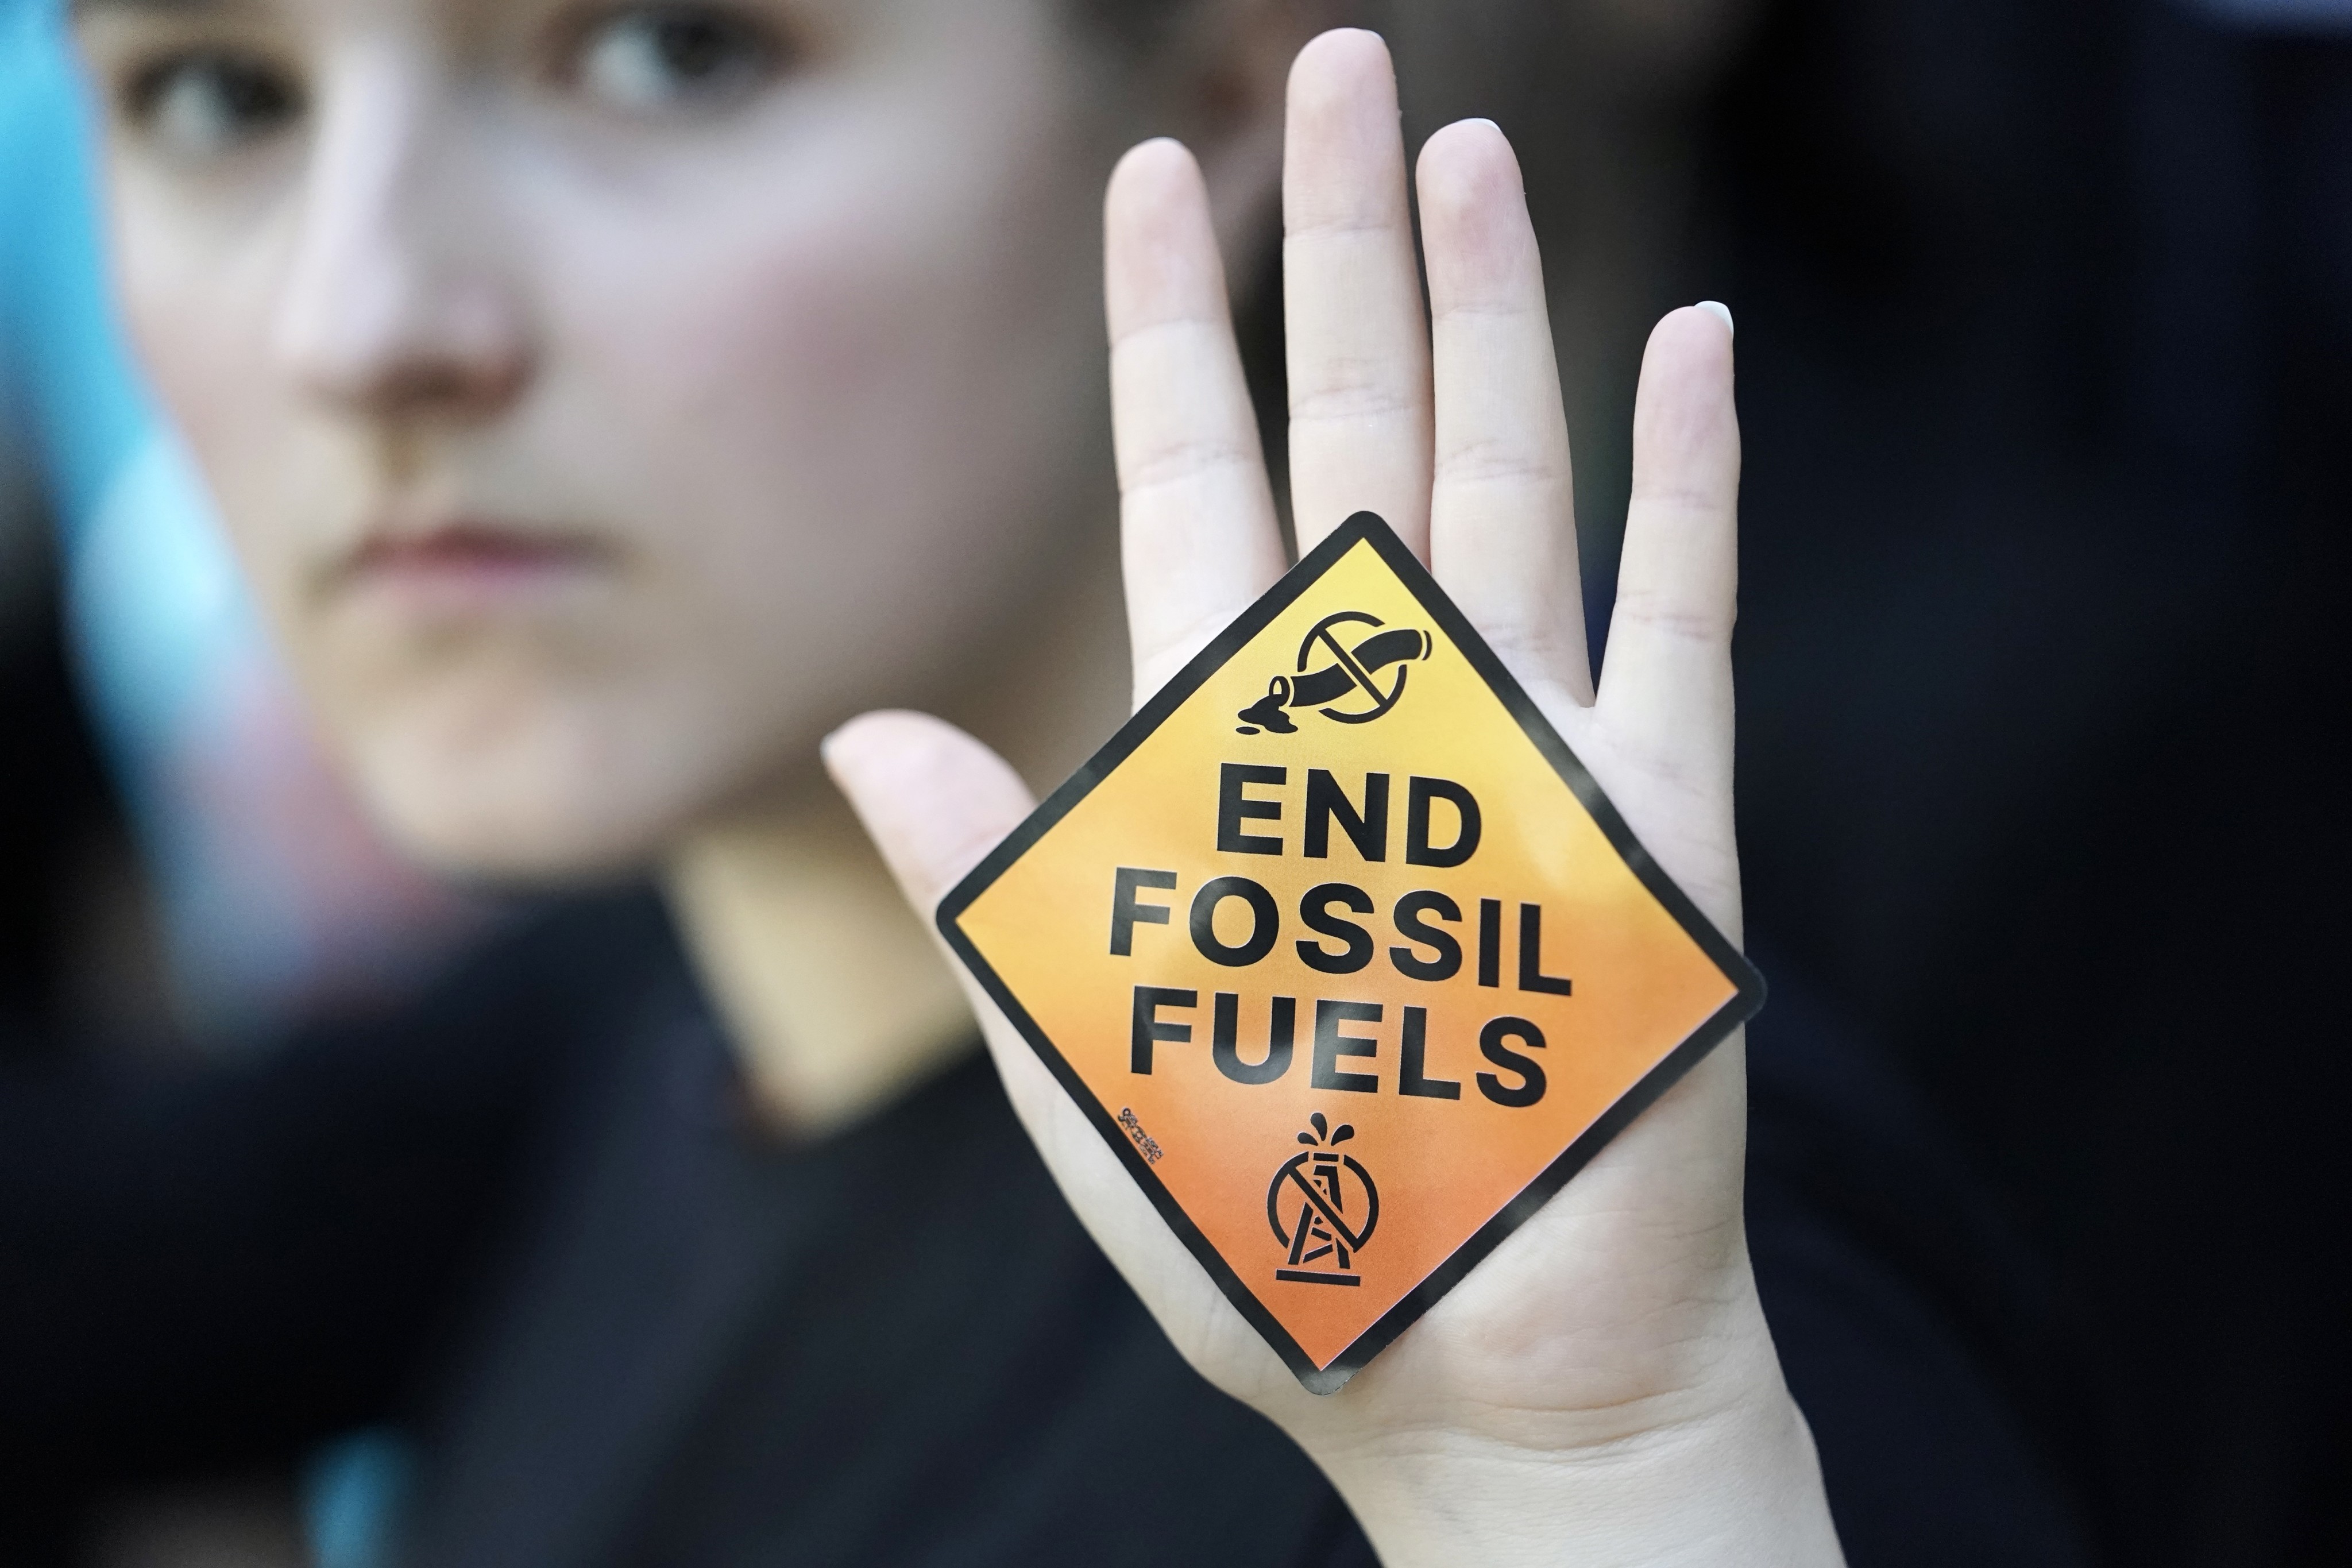 A demonstrator makes a point at the Cop28 UN climate summit on December 2 in Dubai, United Arab Emirates. Photo: AP